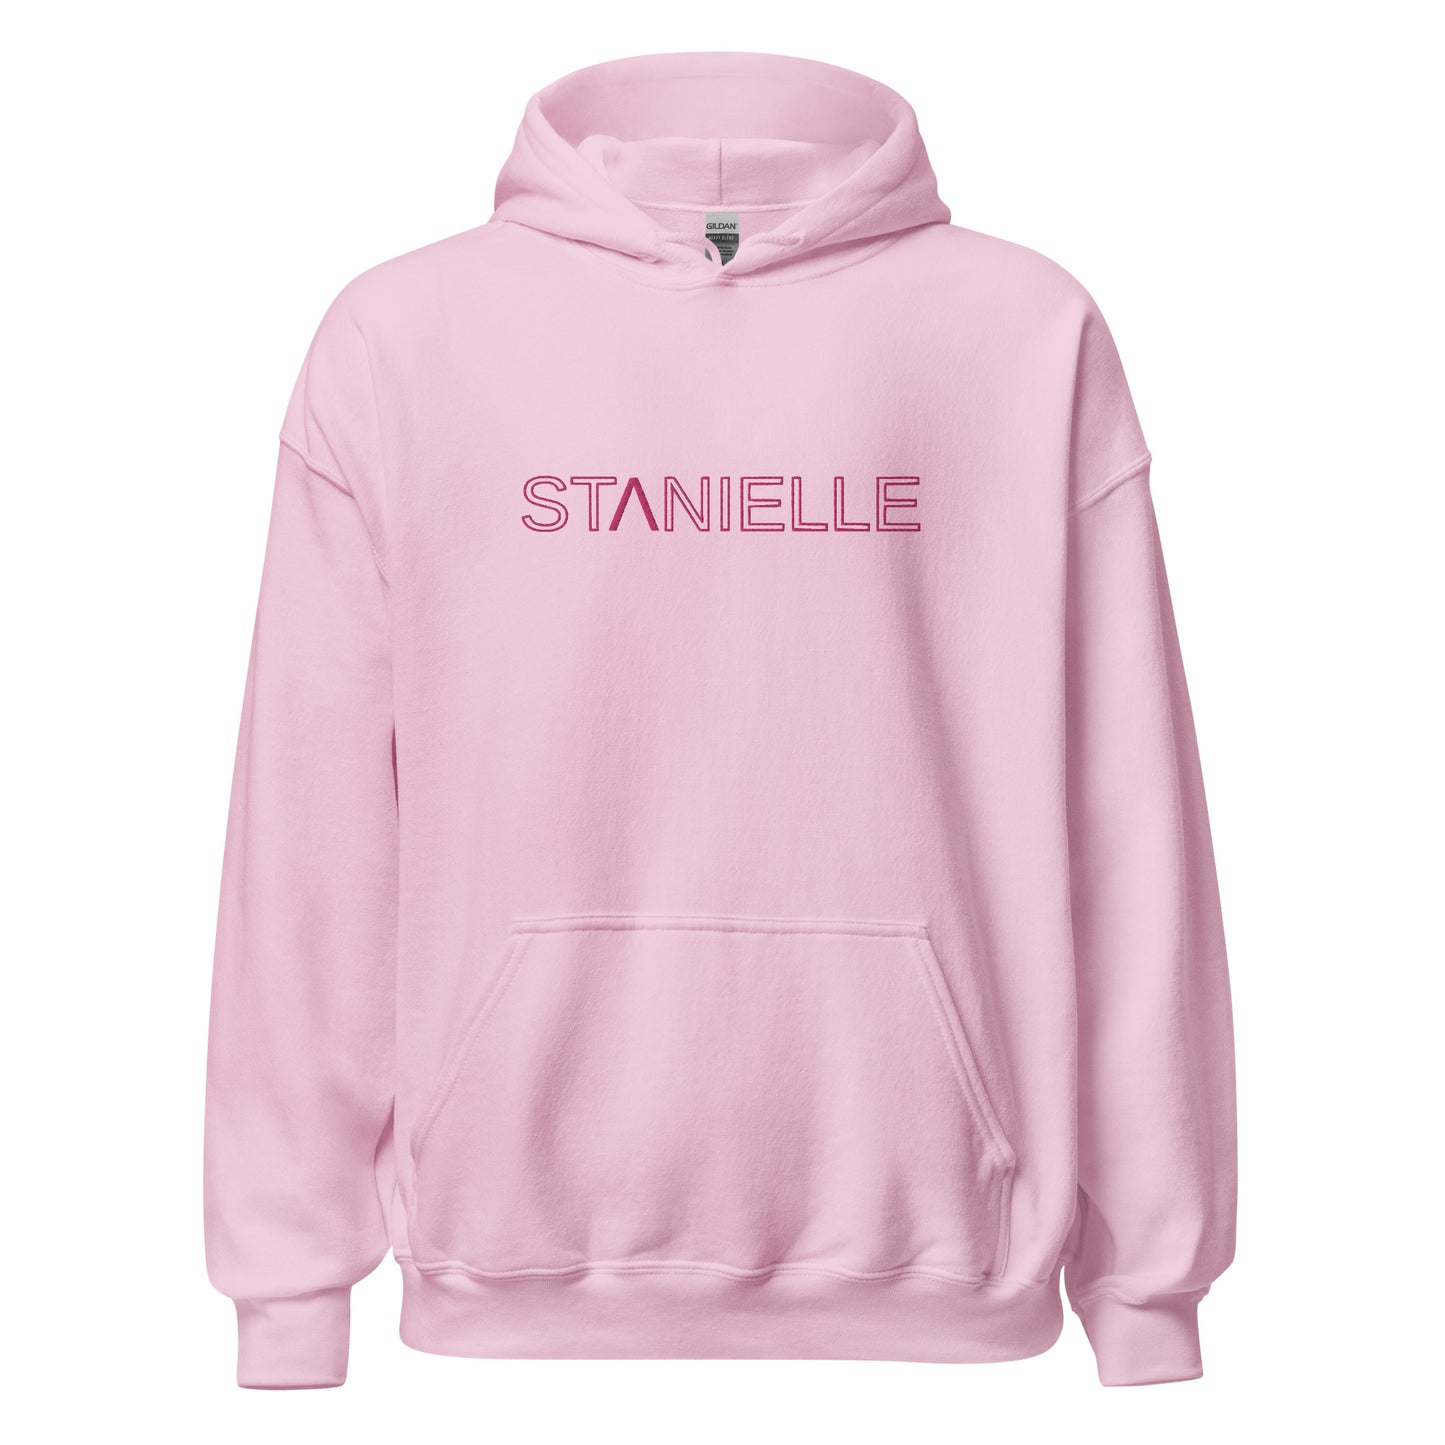 STANIELLE Embroidered Hoodie